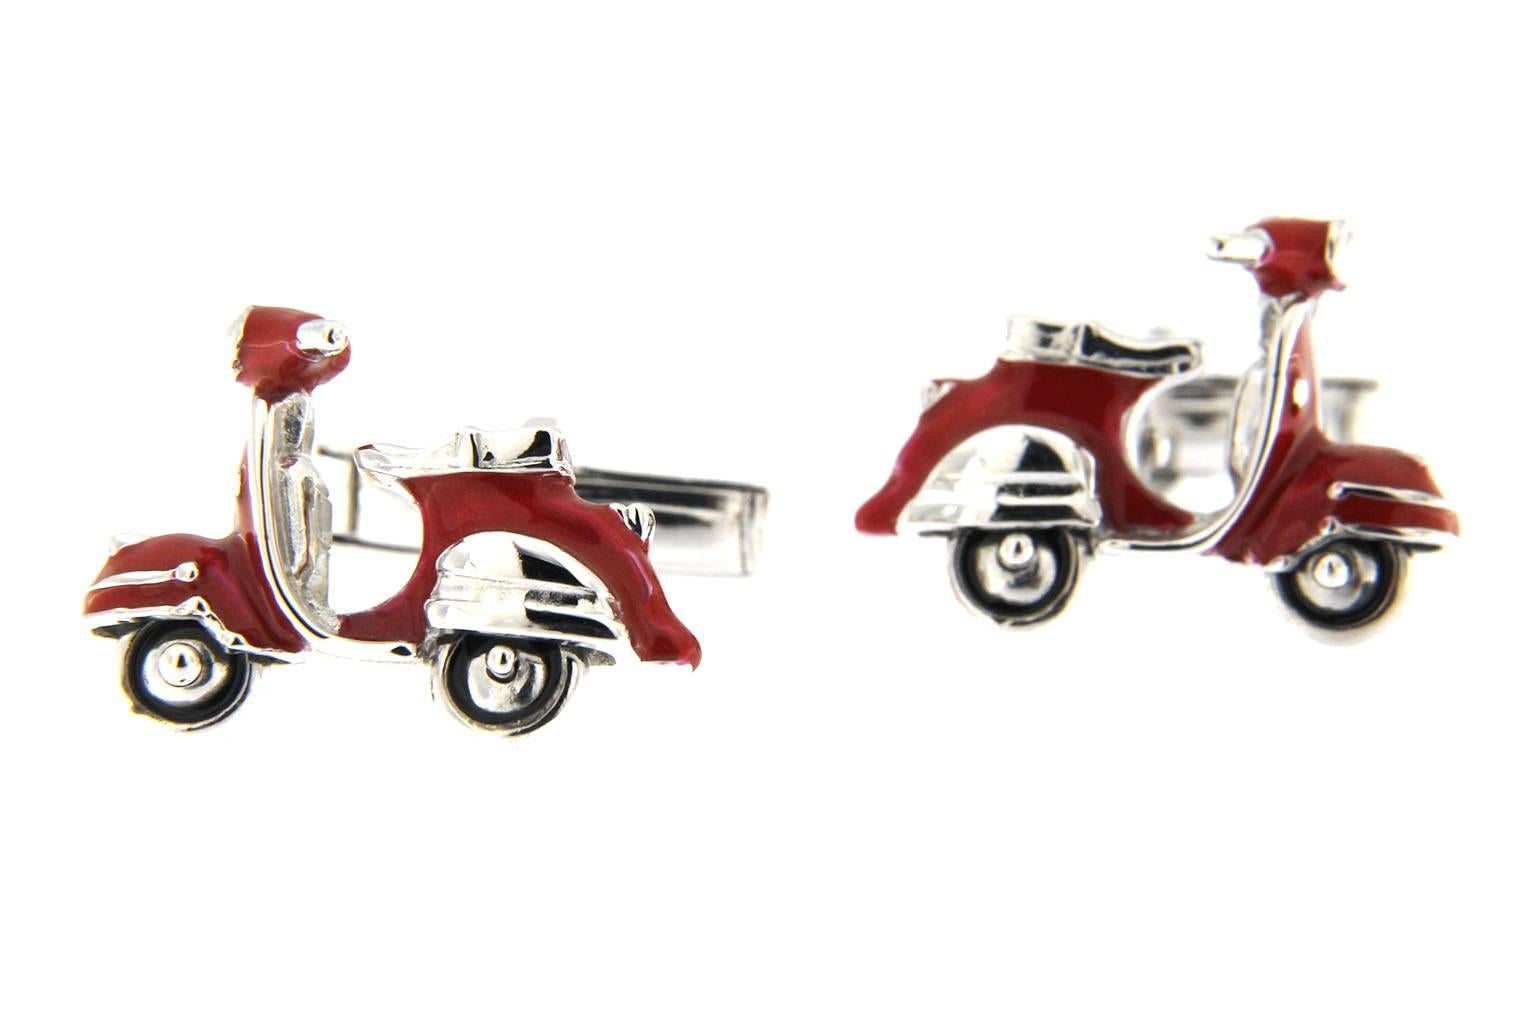 Jona design collection, hand crafted in Italy, enameled sterling silver scooter cufflinks.
Dimensions : H 0.65 in x W 0.90 in x D 0.20 in - H 16.60 mm x W 23.05 mm X D 5.17 mm.
All Jona jewelry is new and has never been previously owned or worn.